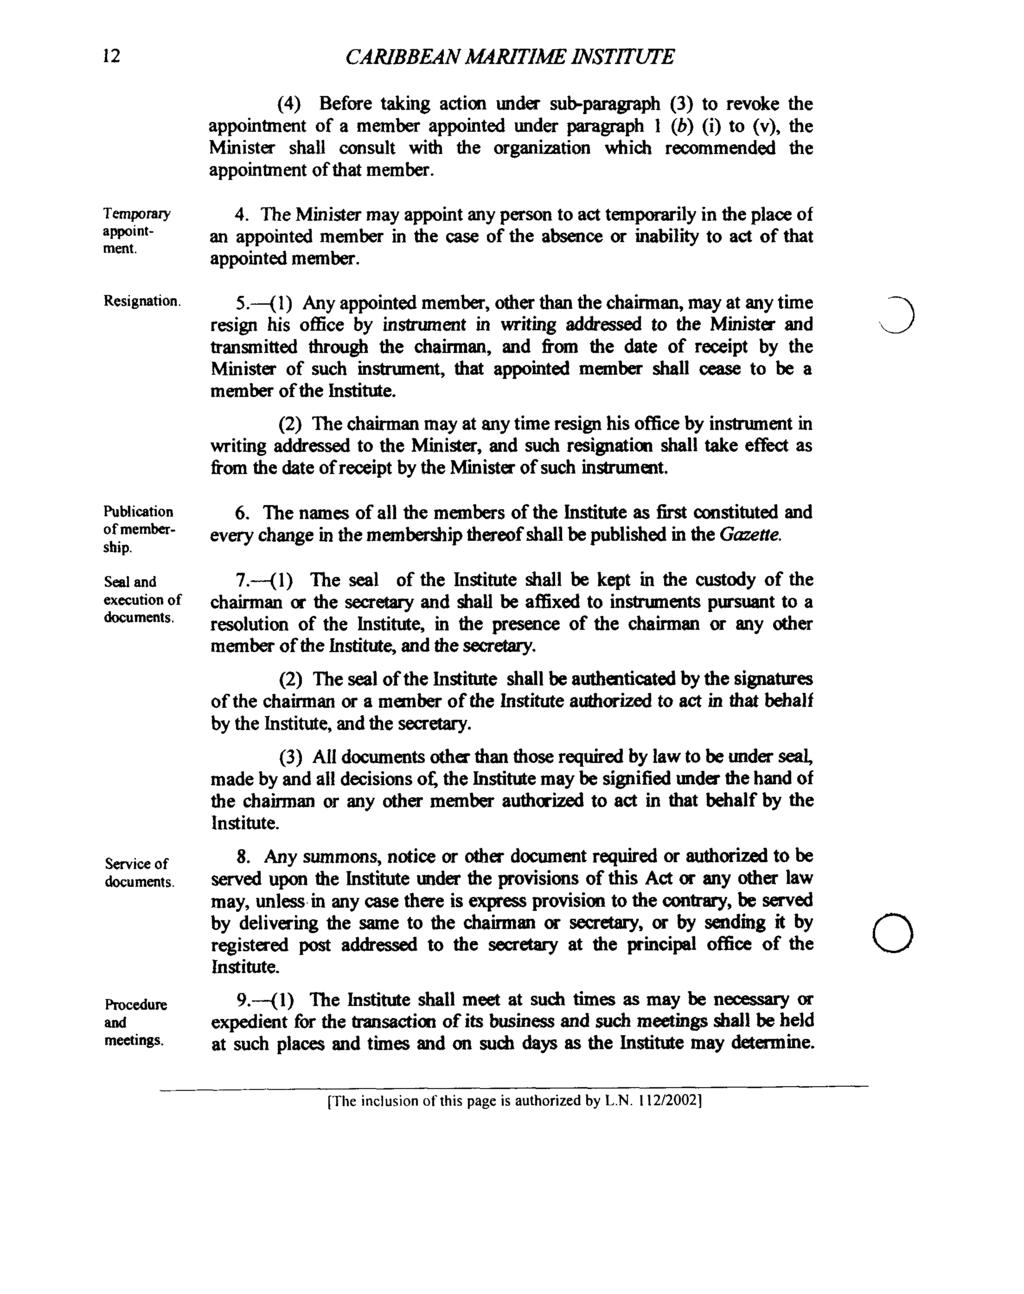 12 CARIBBEAN UPRITIME INST'ITWE (4) Before taking action under subparagraph (3) to revoke the appointment of a member appointed under paragraph 1 (b) (i) to (v), the Minister shall consult with the